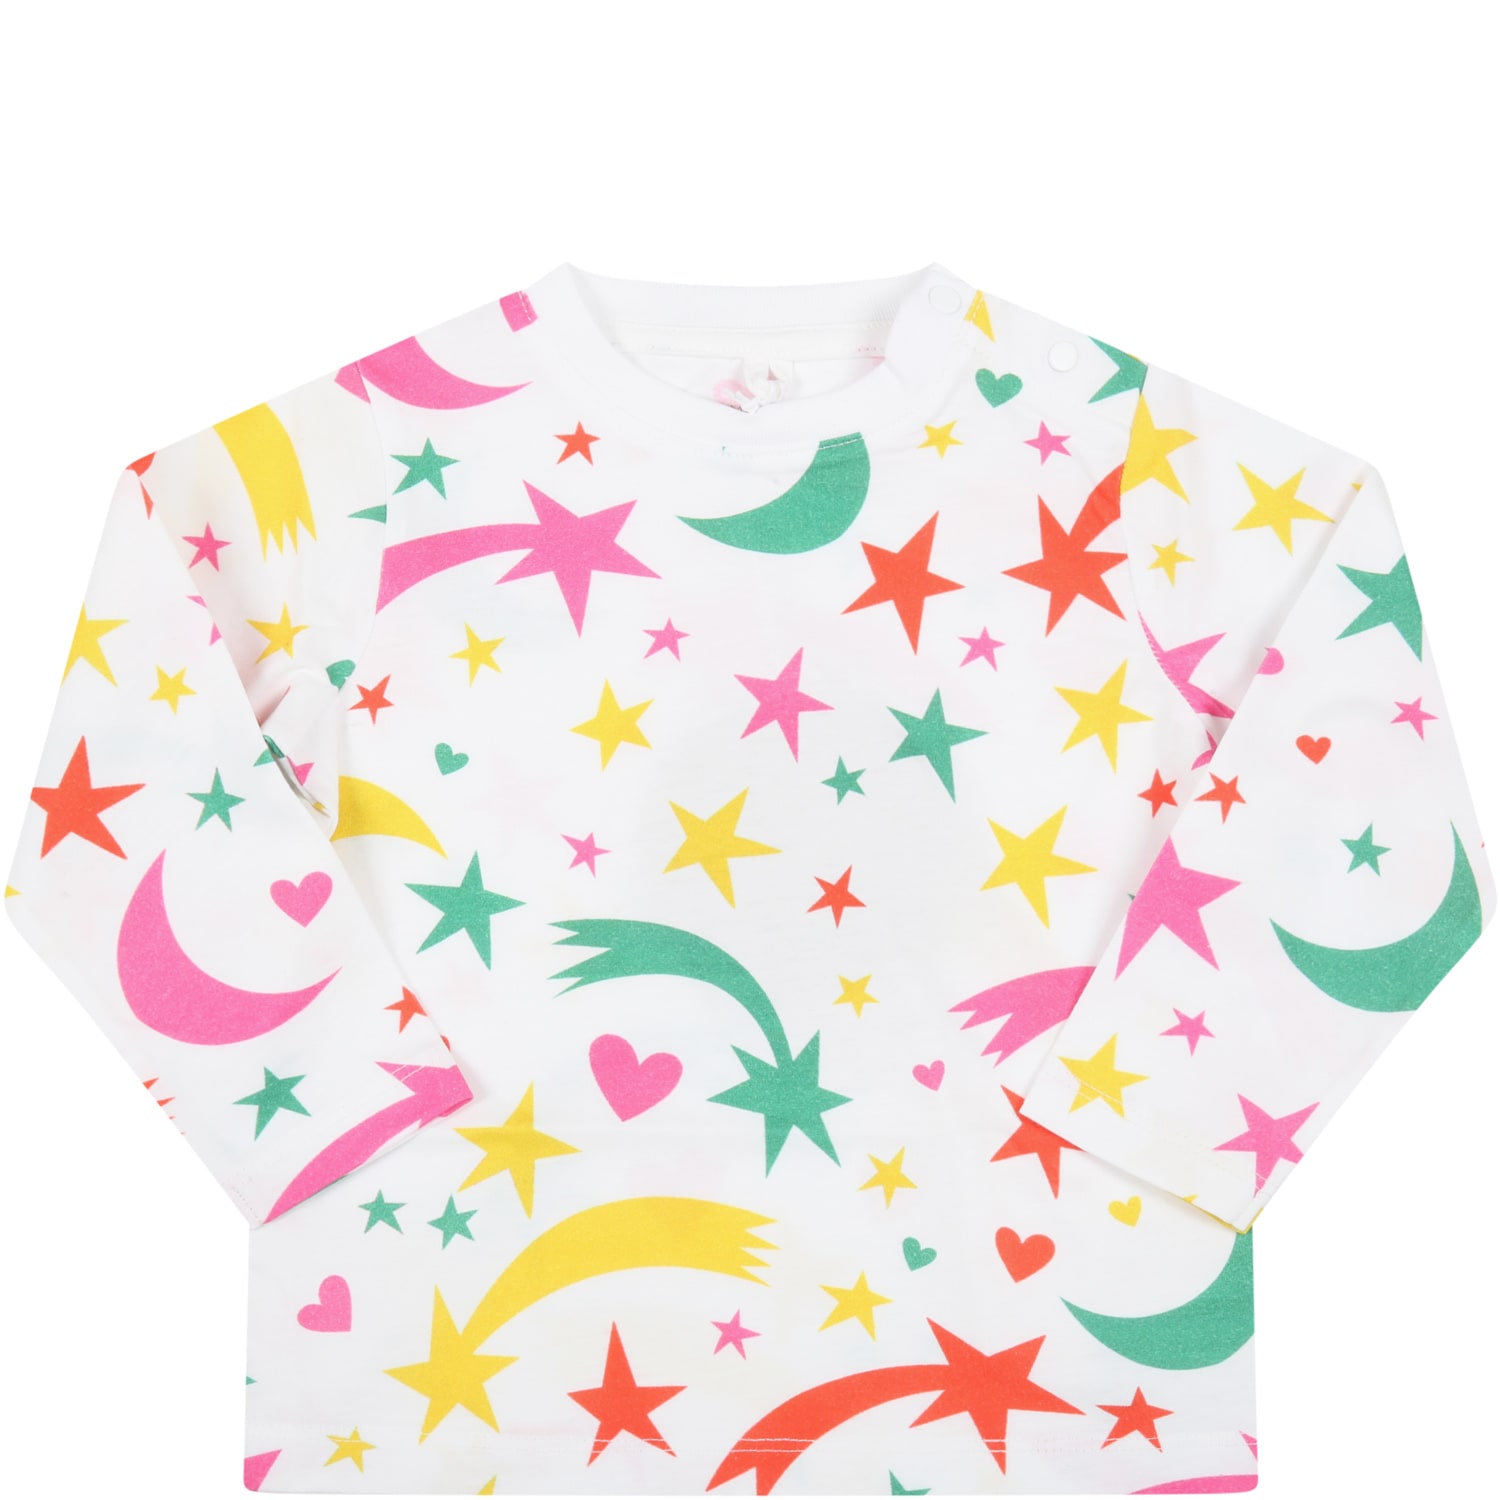 Stella McCartney Kids White T-shirt For Baby Girl With Colorful Stars